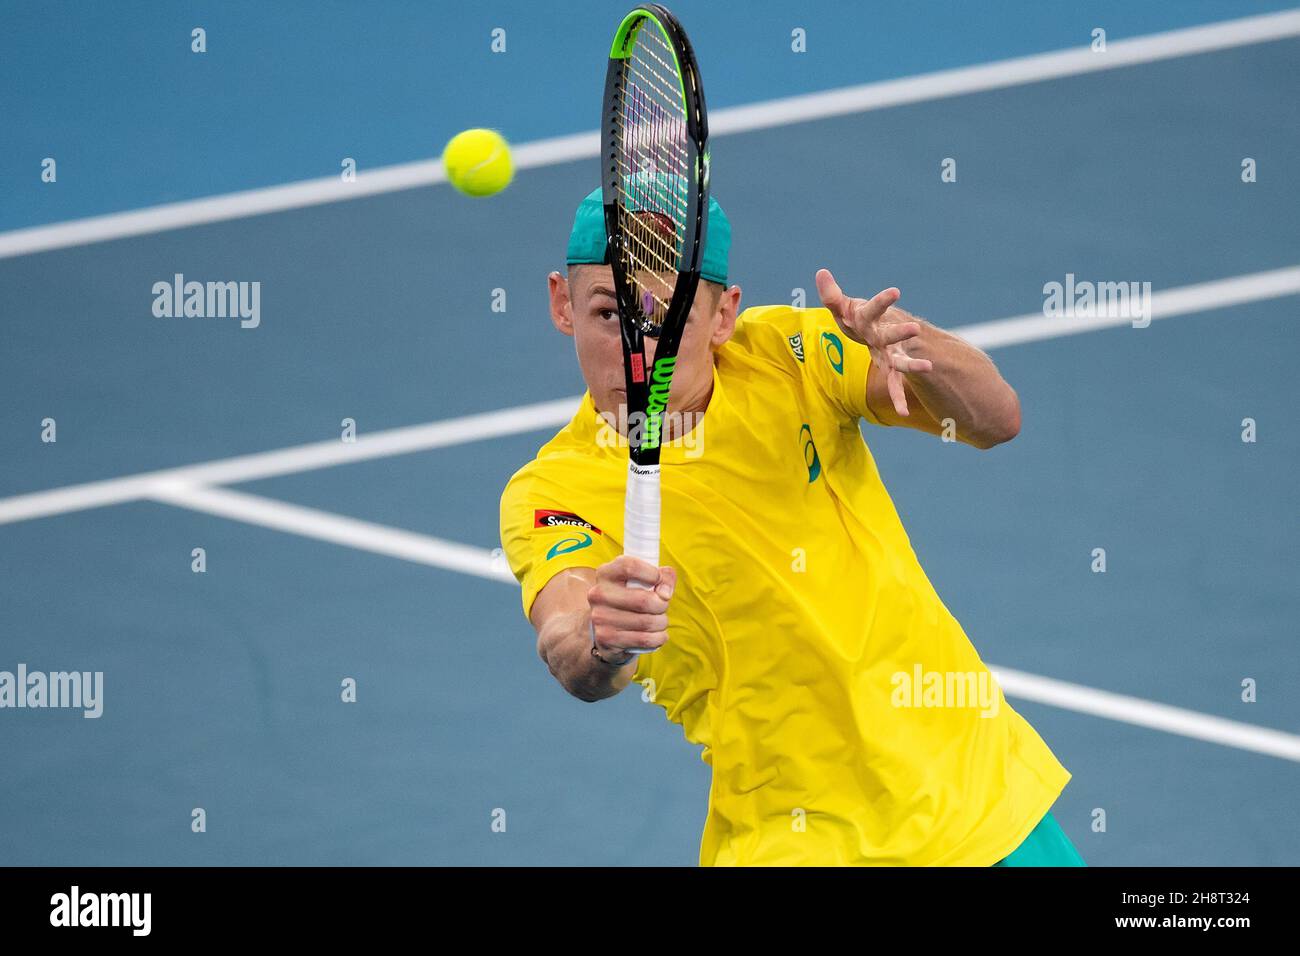 SYDNEY, AUSTRALIA - JANUARY 09: Alex De Minaur of Australia plays a backhand volley during day seven of the quarter-final doubles match at the 2020 ATP Cup Tennis at Ken Rosewall Arena on January 09, 2020 in Sydney, Australia. Stock Photo